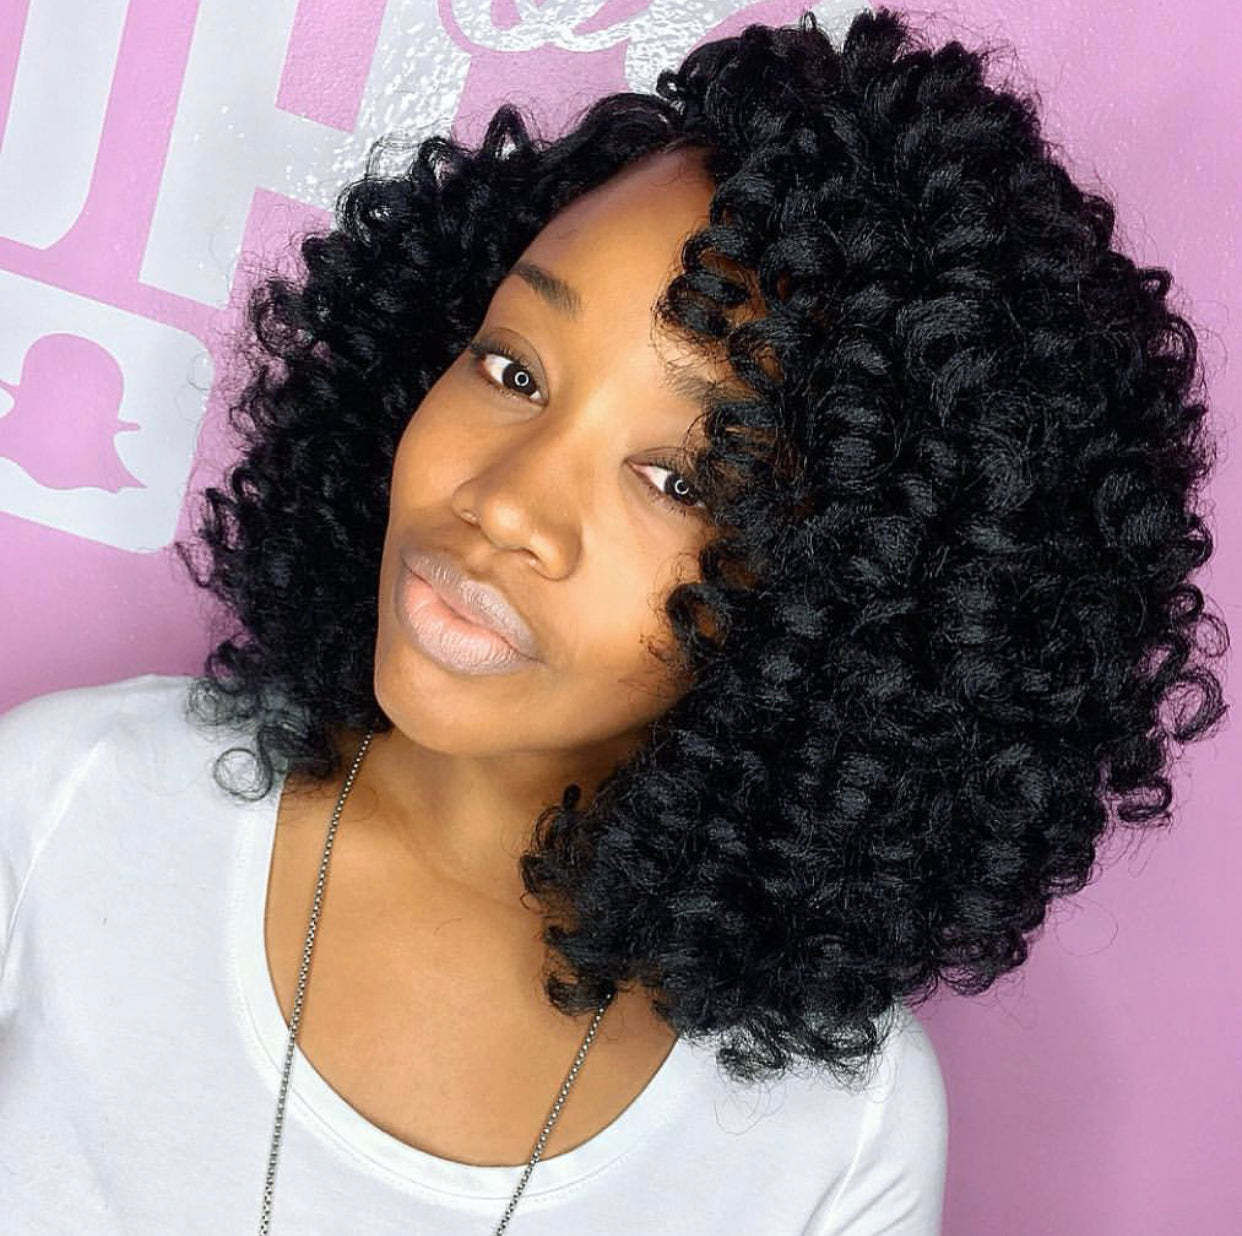 How to Preserve your Curlkalon Curls